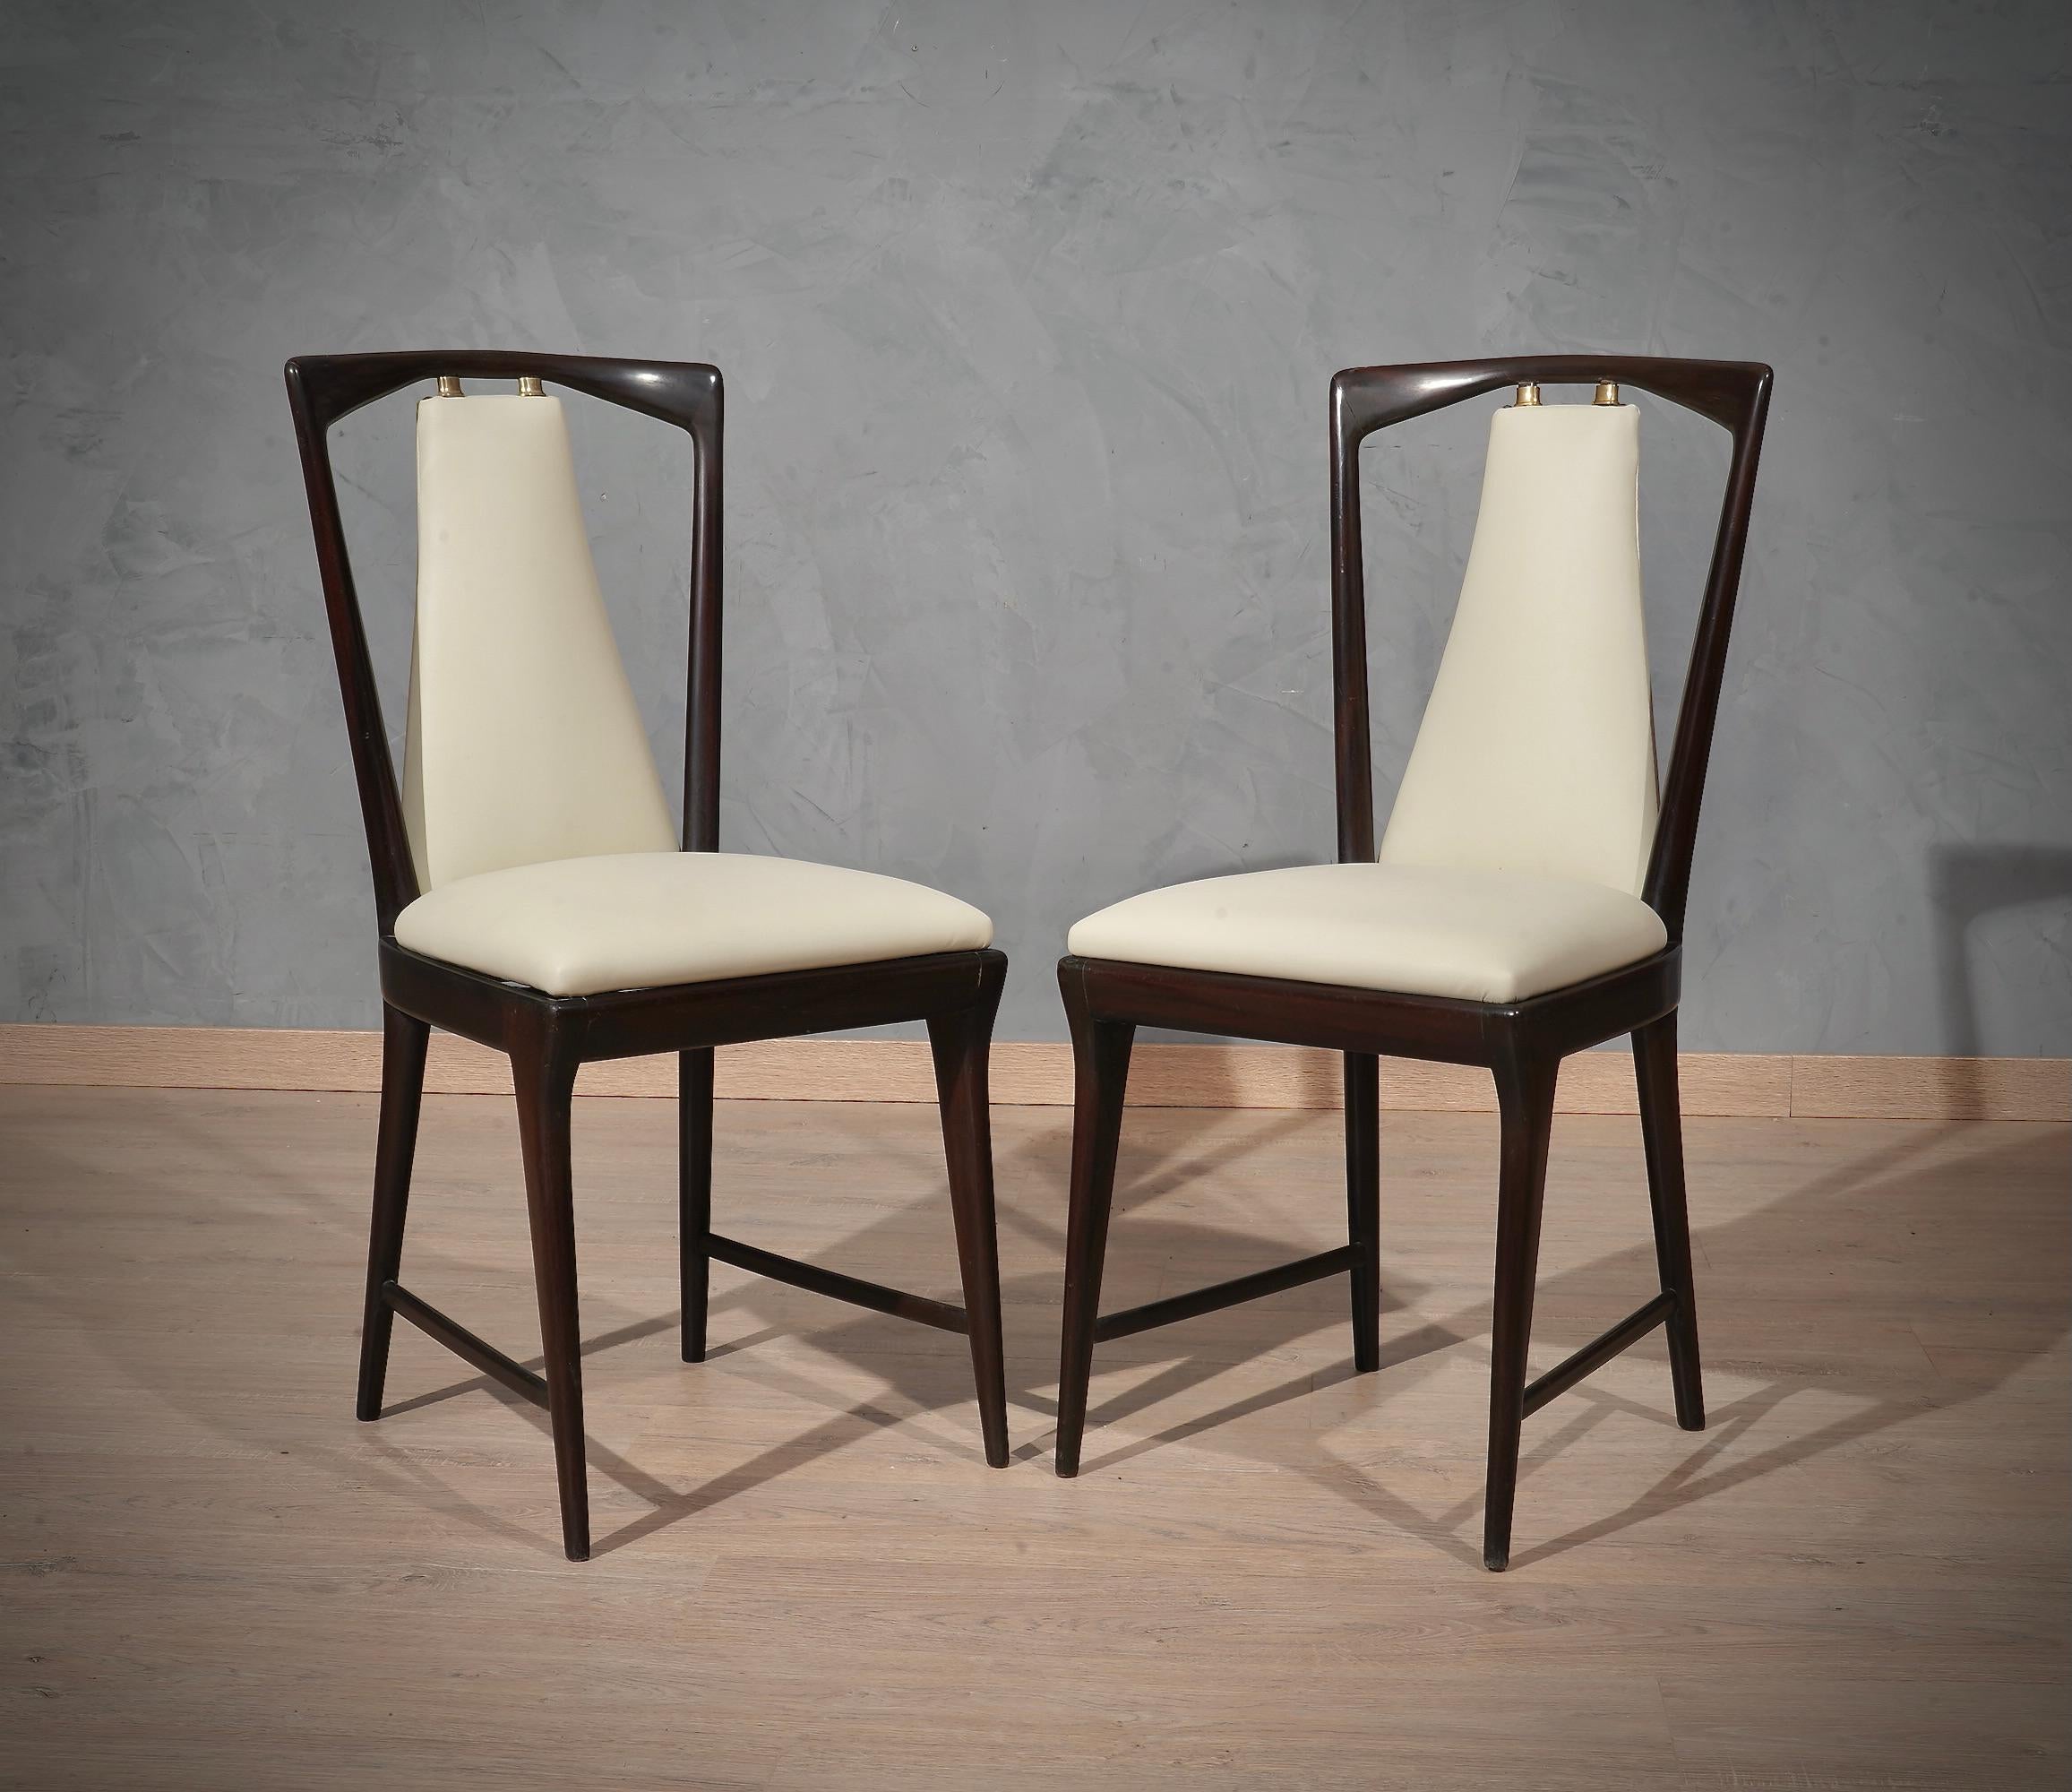 Innovative, for a design that is still contemporary today, I would dare to say an eternally brilliant shape. Precious mahogany wood material. In the true style of Osvaldo Borsani in the middle of the century.

The 6 chairs are made of a structure